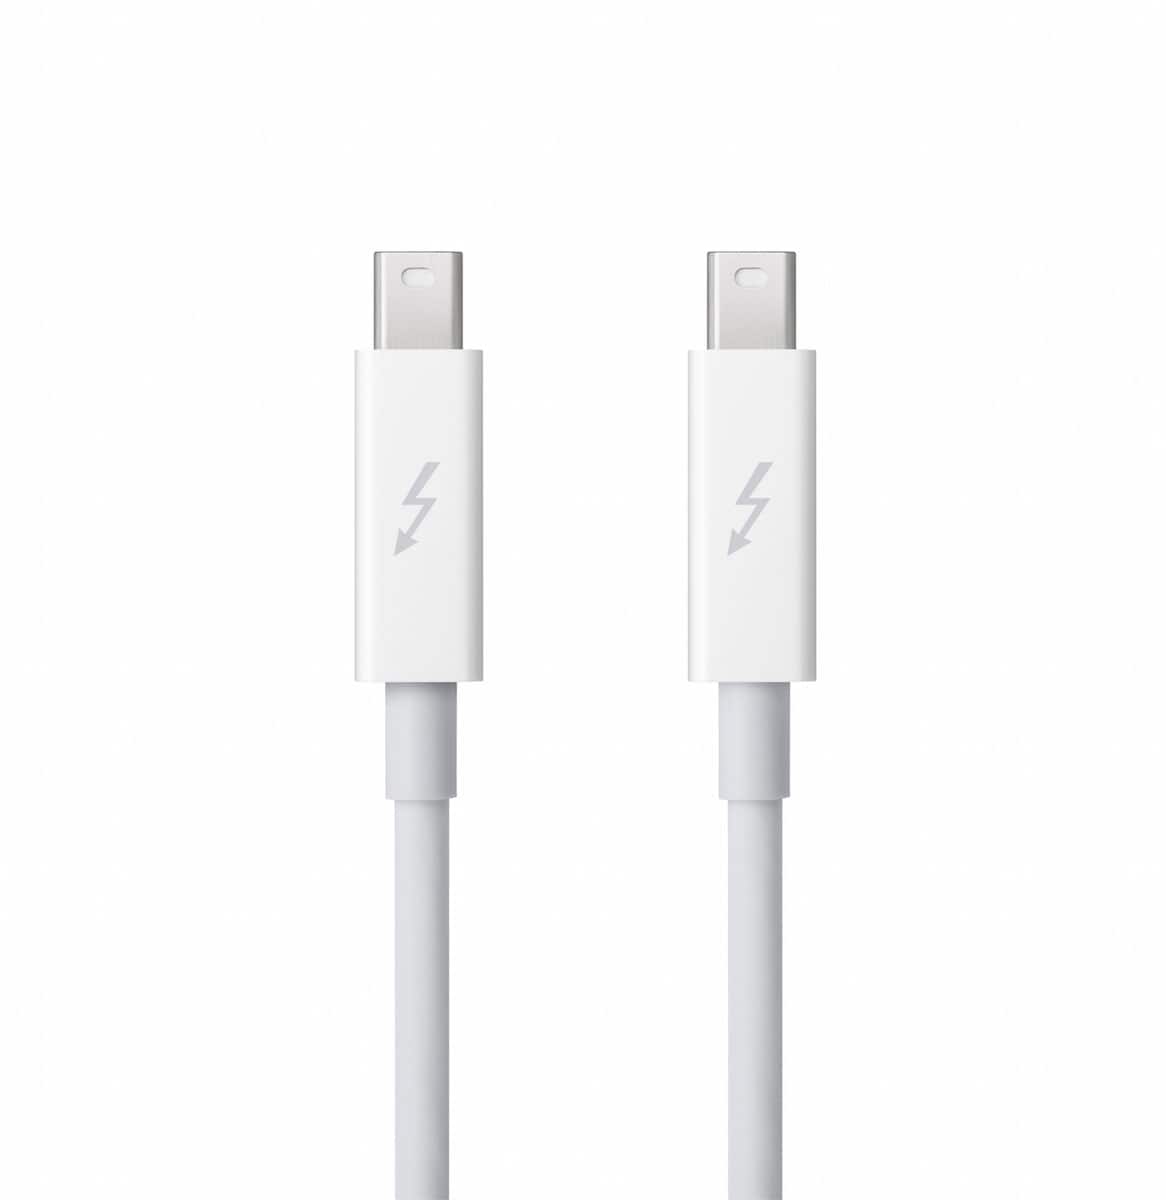 APPLE CABLE THUNDERBOLT2 - 2M